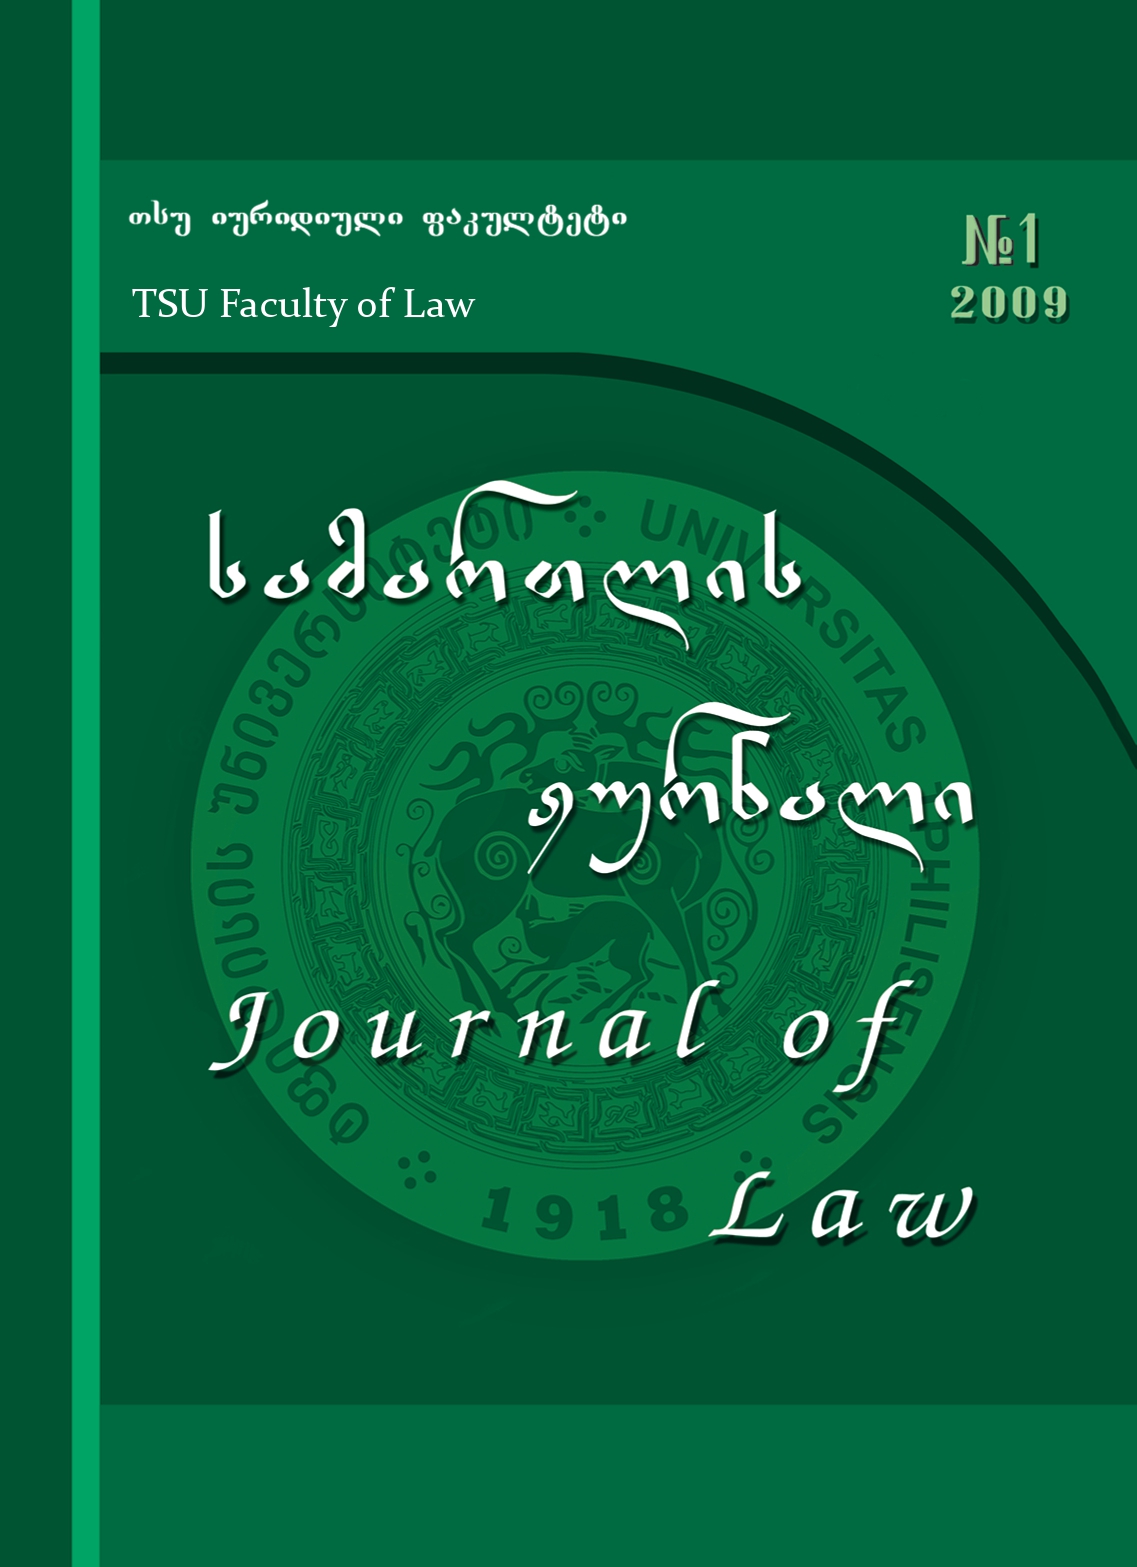 					View No. 1 (2009):  Journal of Law
				